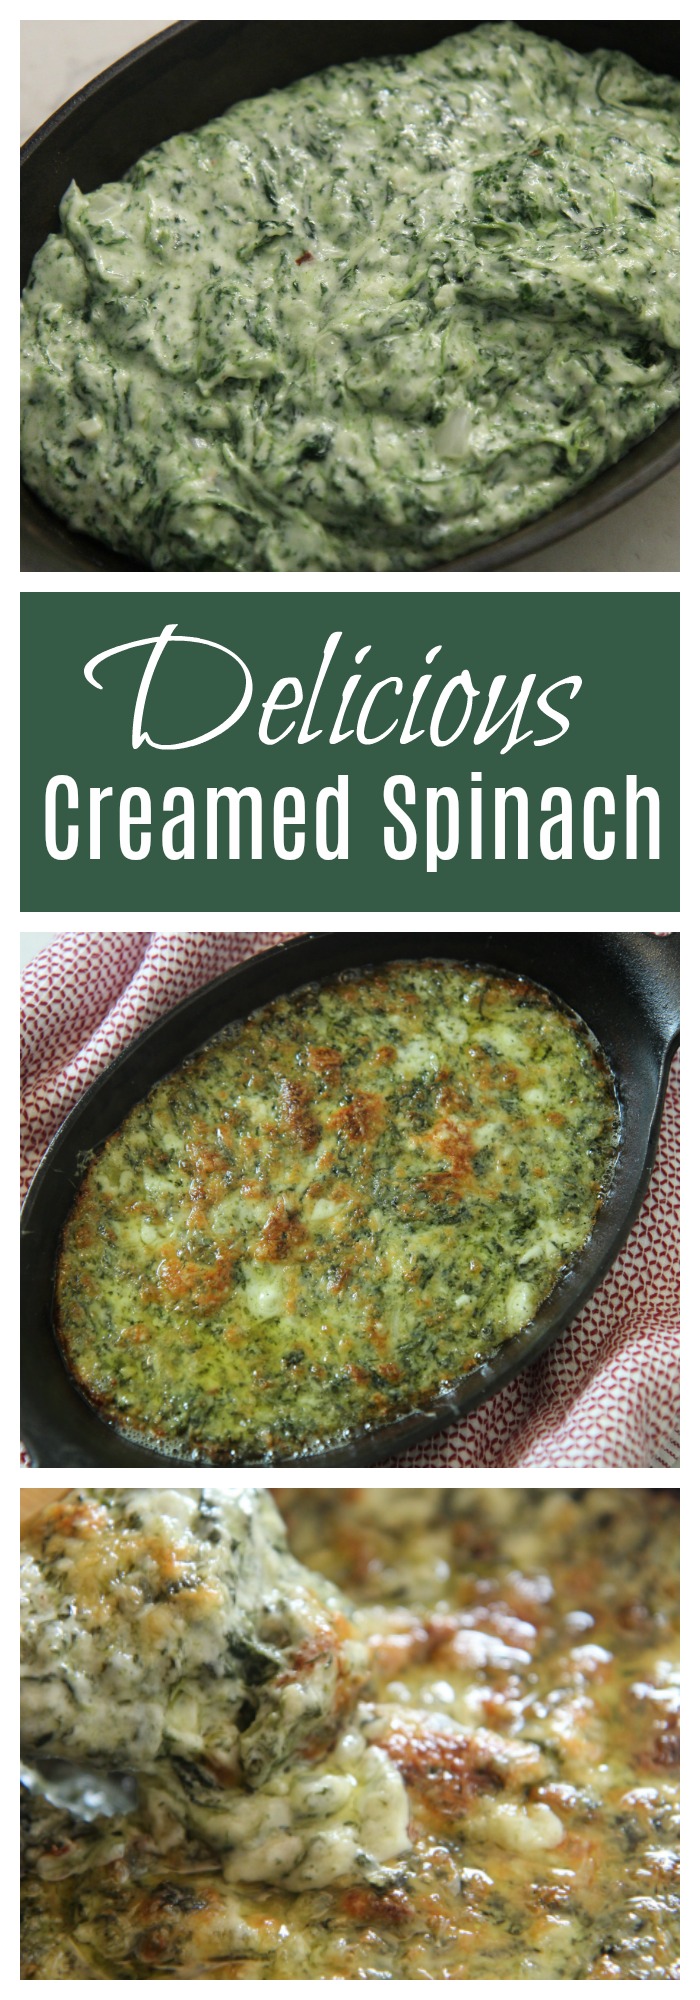 Delicious and easy creamed spinach dip recipe.